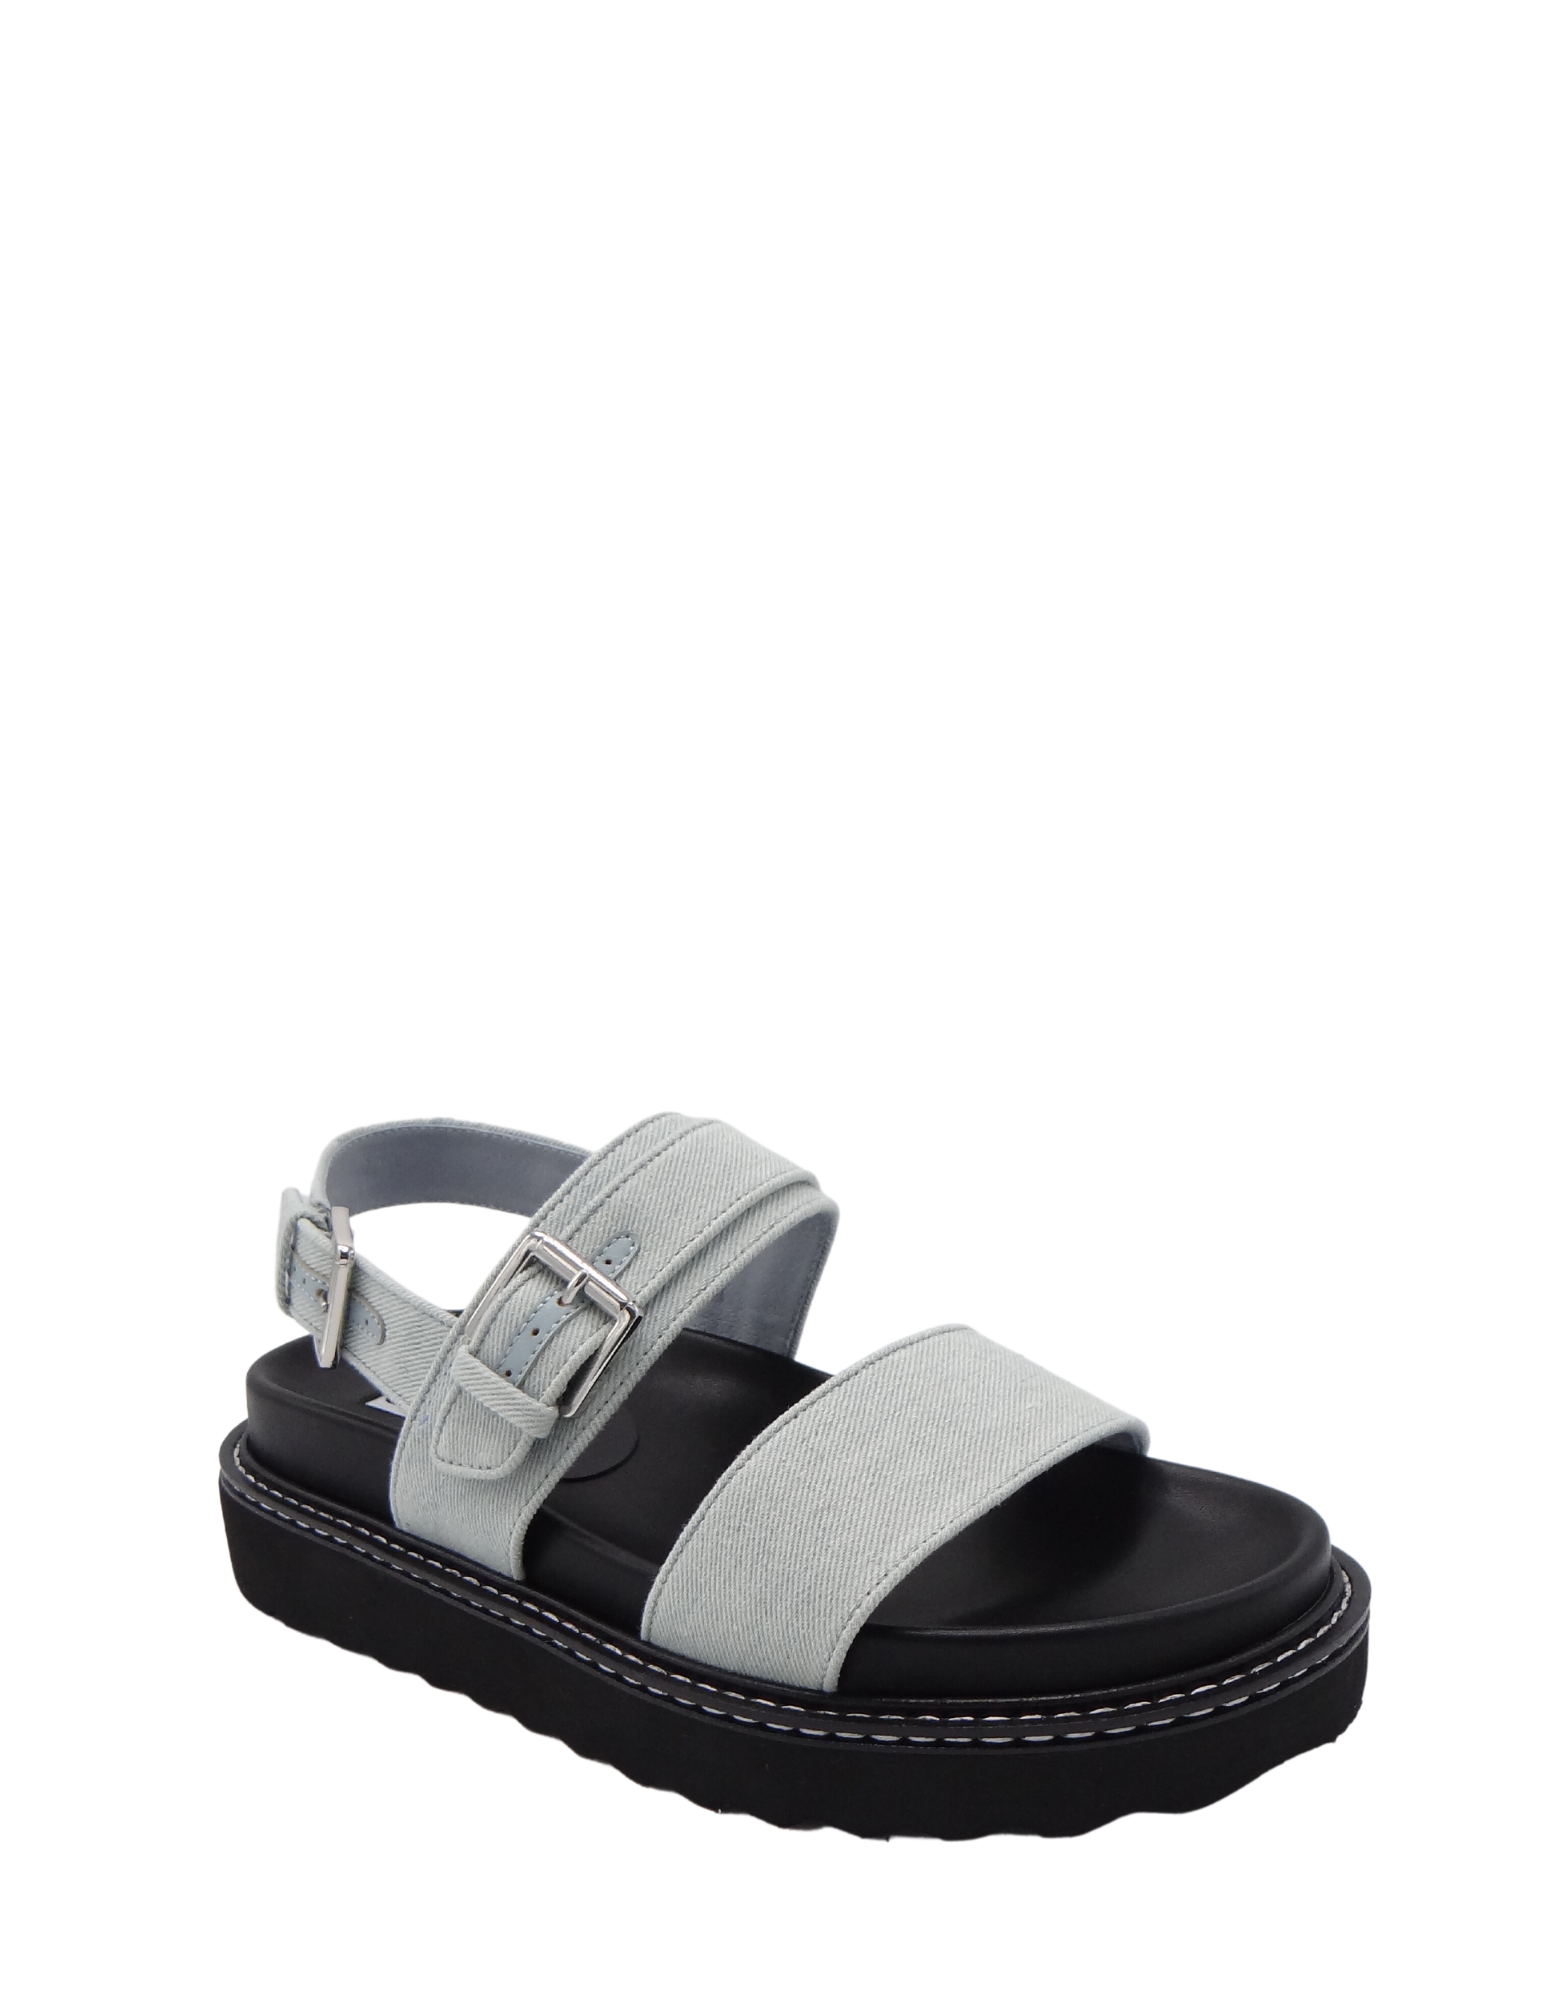 Parallel Culture Shoes and Fashion Online SANDALS CAVERLY XINA SANDAL